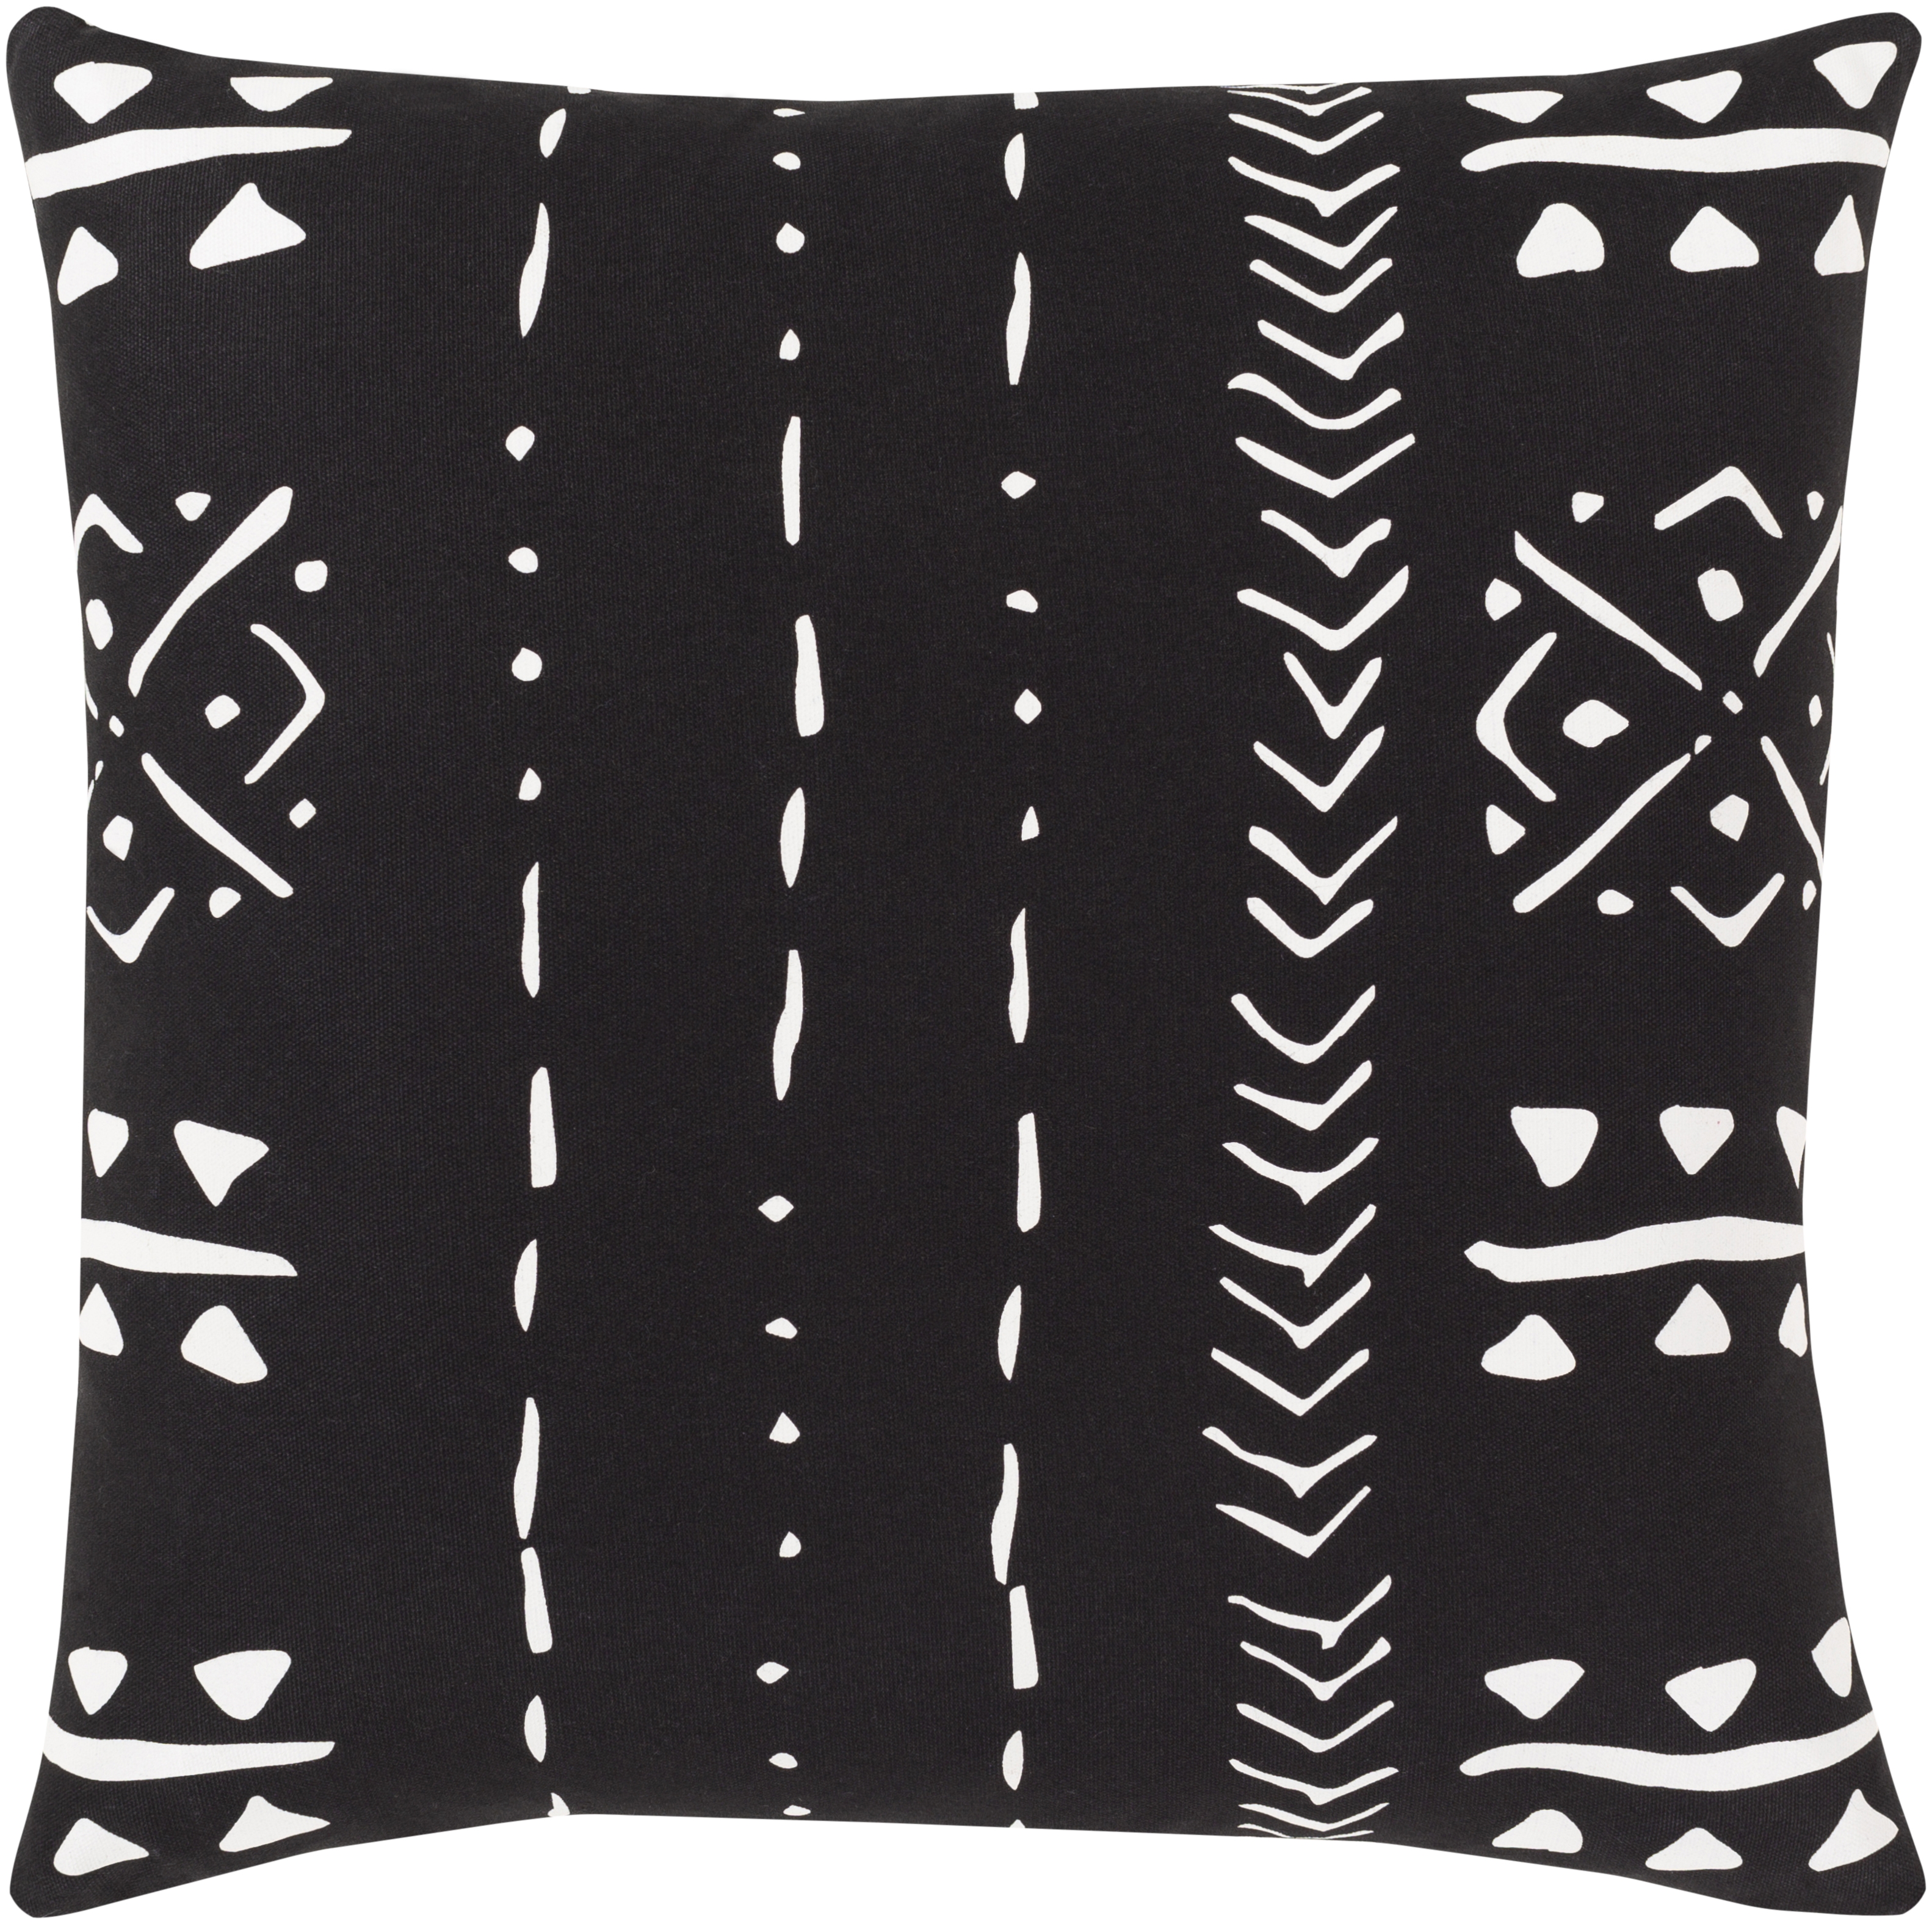 Mud Cloth - MDC-002 - 18" x 18" - pillow cover only - Image 0